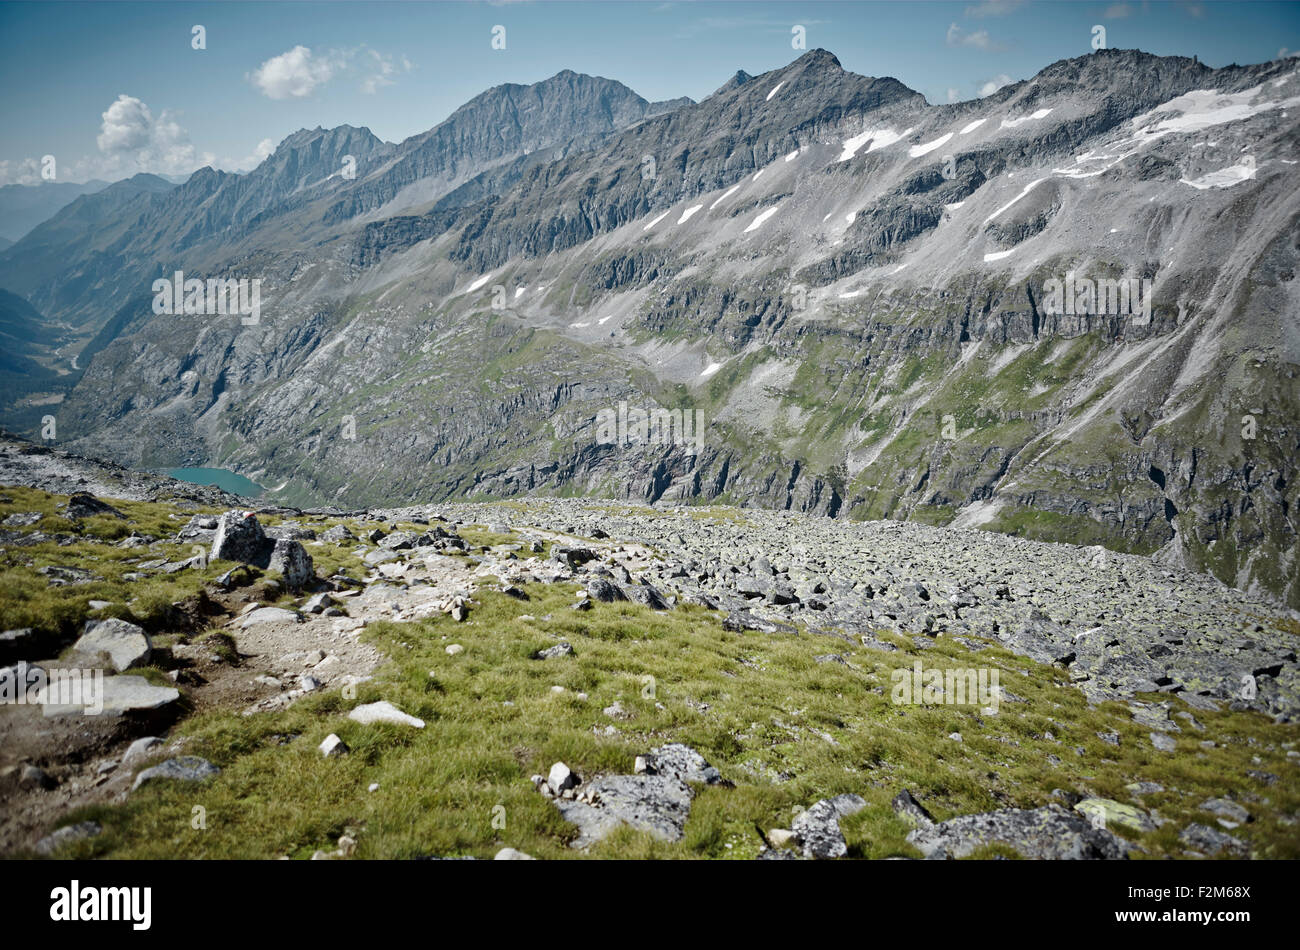 Austria, East Tyrol, Hohe Tauern National Park, mountainscape with Weisssee Stock Photo